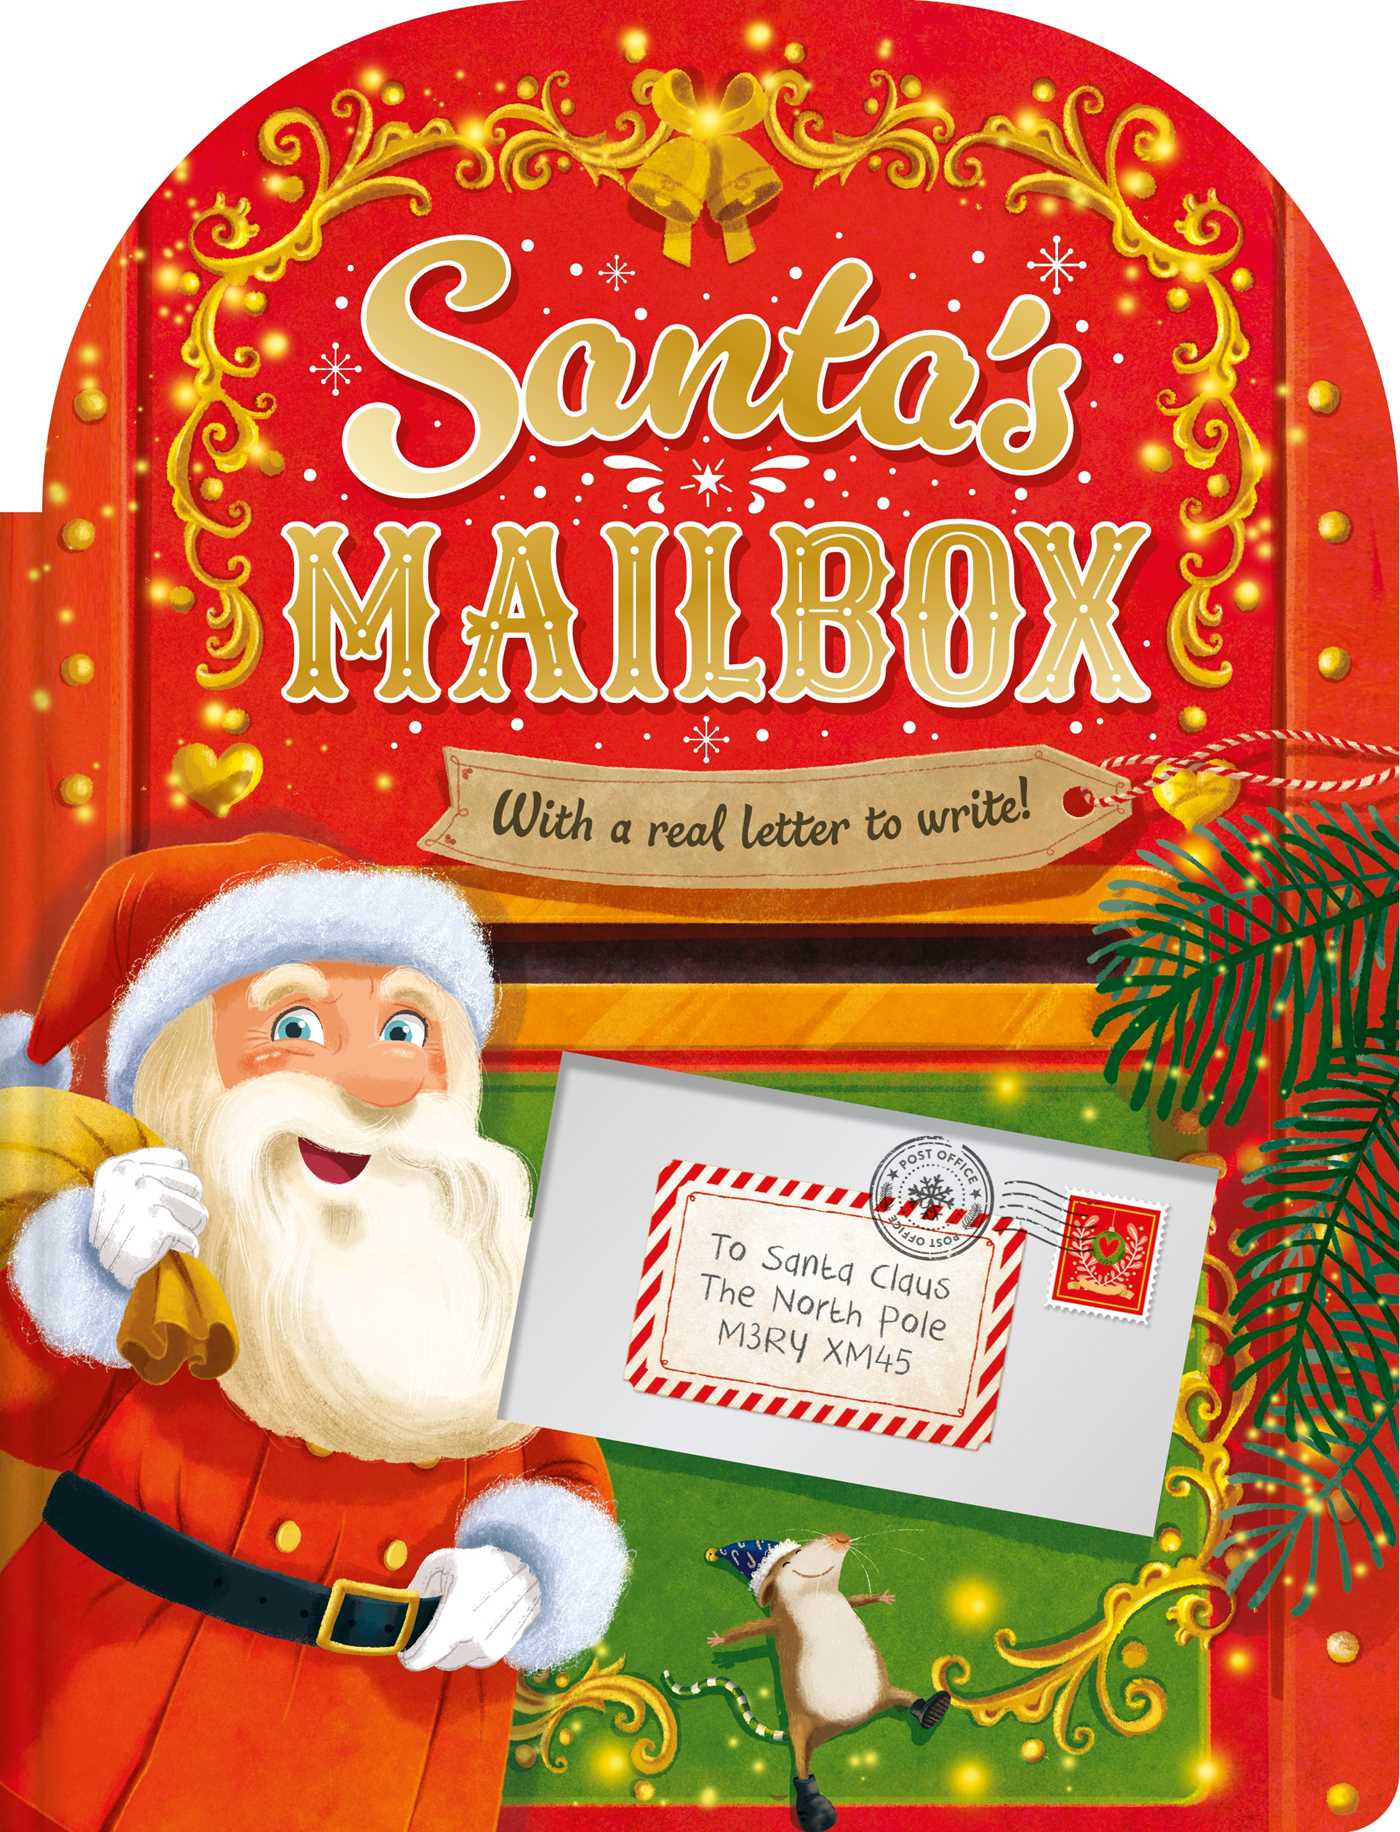 Santa's Mailbox : Festive Storybook with Your Very Own Letter to Send to the North Pole! | IglooBooks